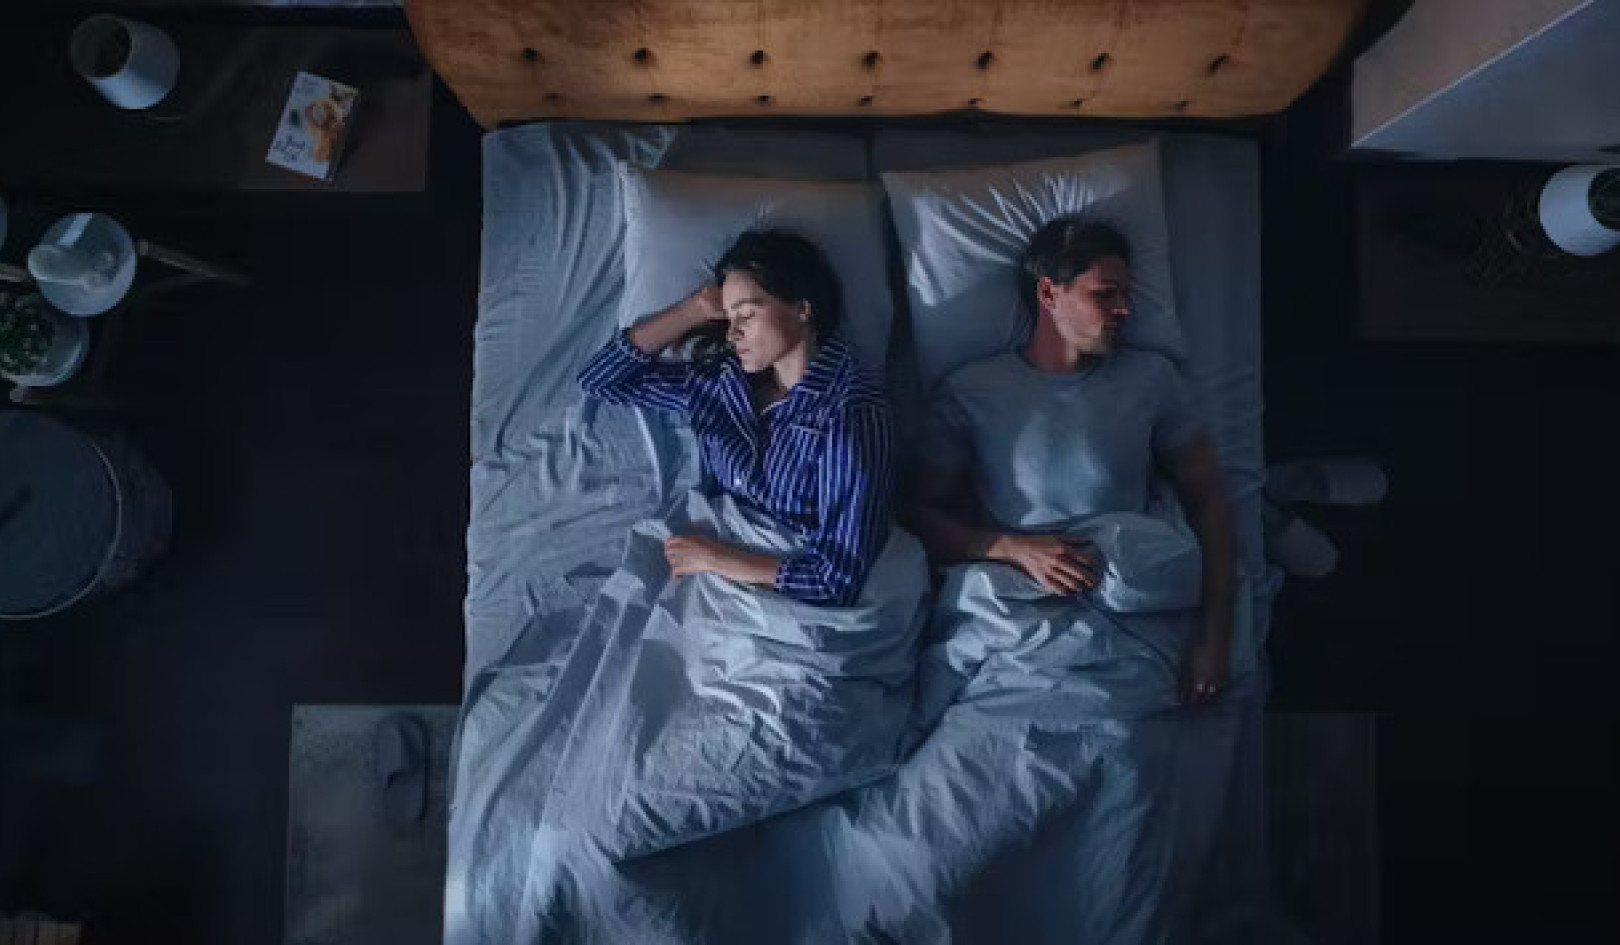 How Gender Influences Sleep Quality and Disease Risk